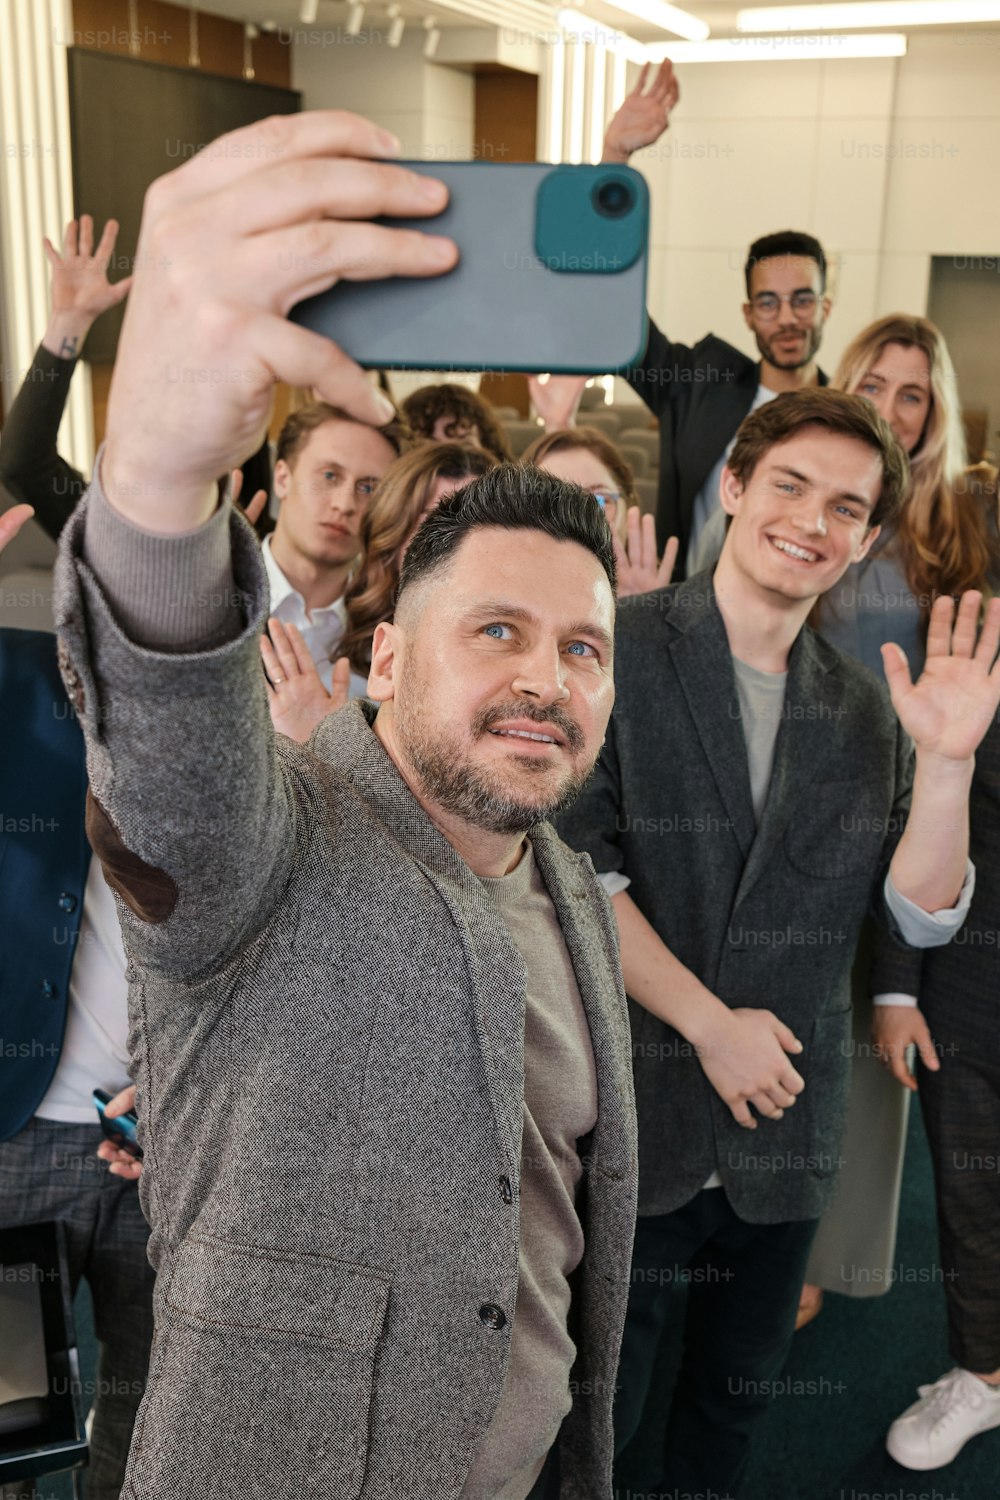 a man taking a selfie with a group of people behind him